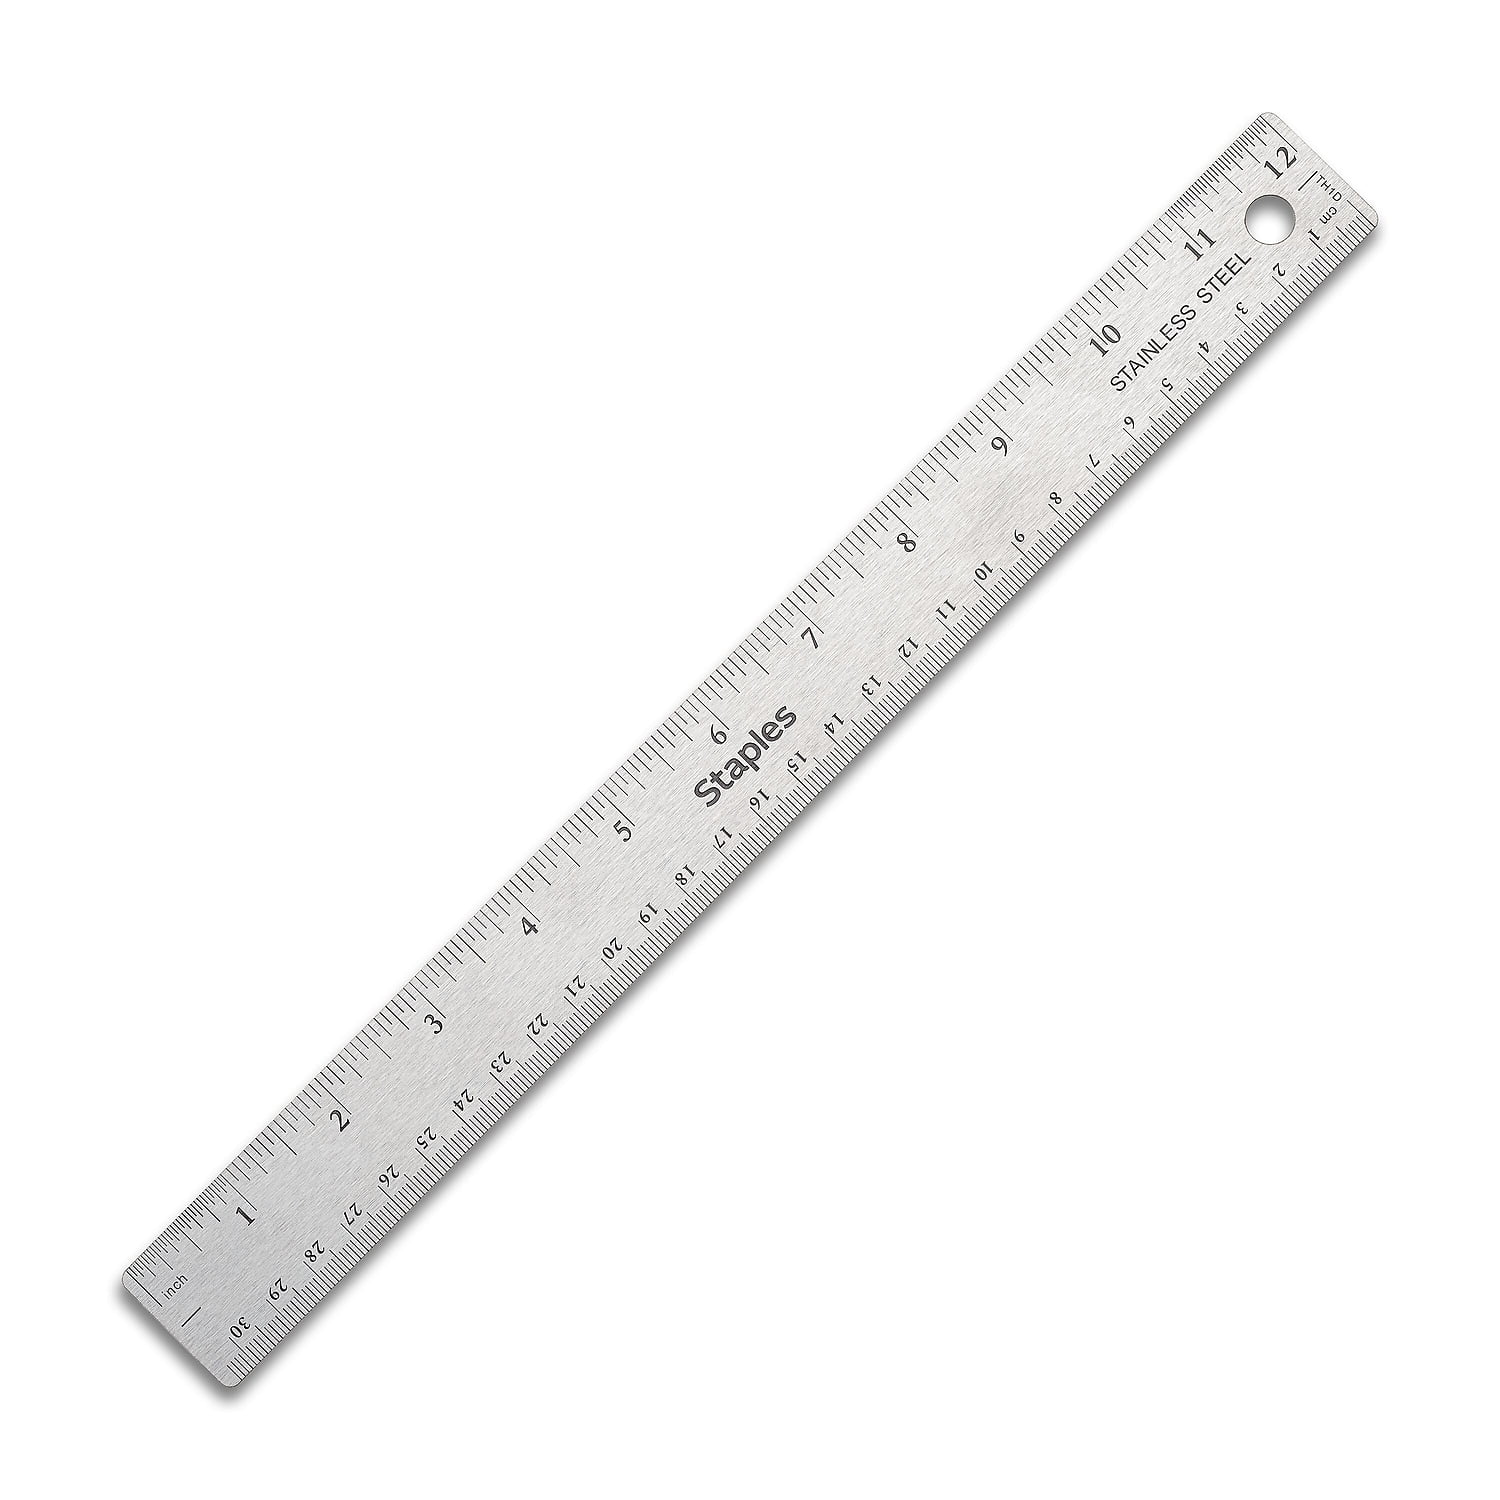 2 Pack Stainless Steel Ruler Machinist Engineer Ruler, Rigid Metal Ruler  with Inch Graduations for Engineering, School, Office, Architect, and  Drawing, 6 Inch - 15cm 